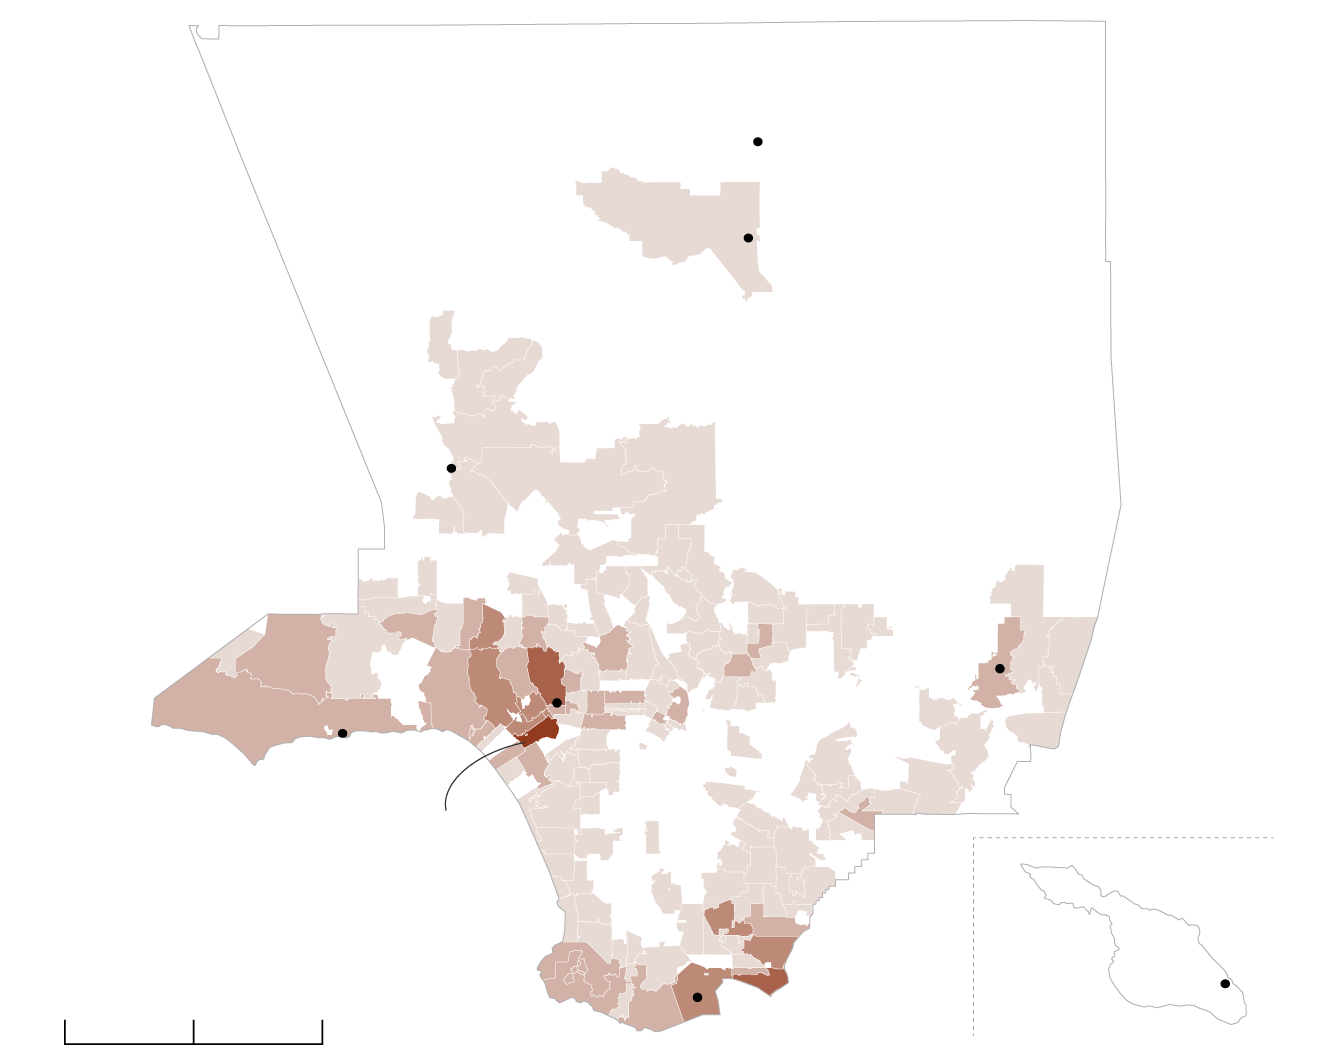 A map of Los Angeles County that shows the amount donated to Robert Luna’s campaign per ZIP Code. The Katzenberg Family Trust is located in West L.A. and donated $500,000 to Luna’s campaign. Long Beach ZIP Codes also showed a lot of donations to Luna’s campaign. ZIP Codes in the northern and eastern parts of L.A. County often raised little to nothing at all towards Luna’s campaign.